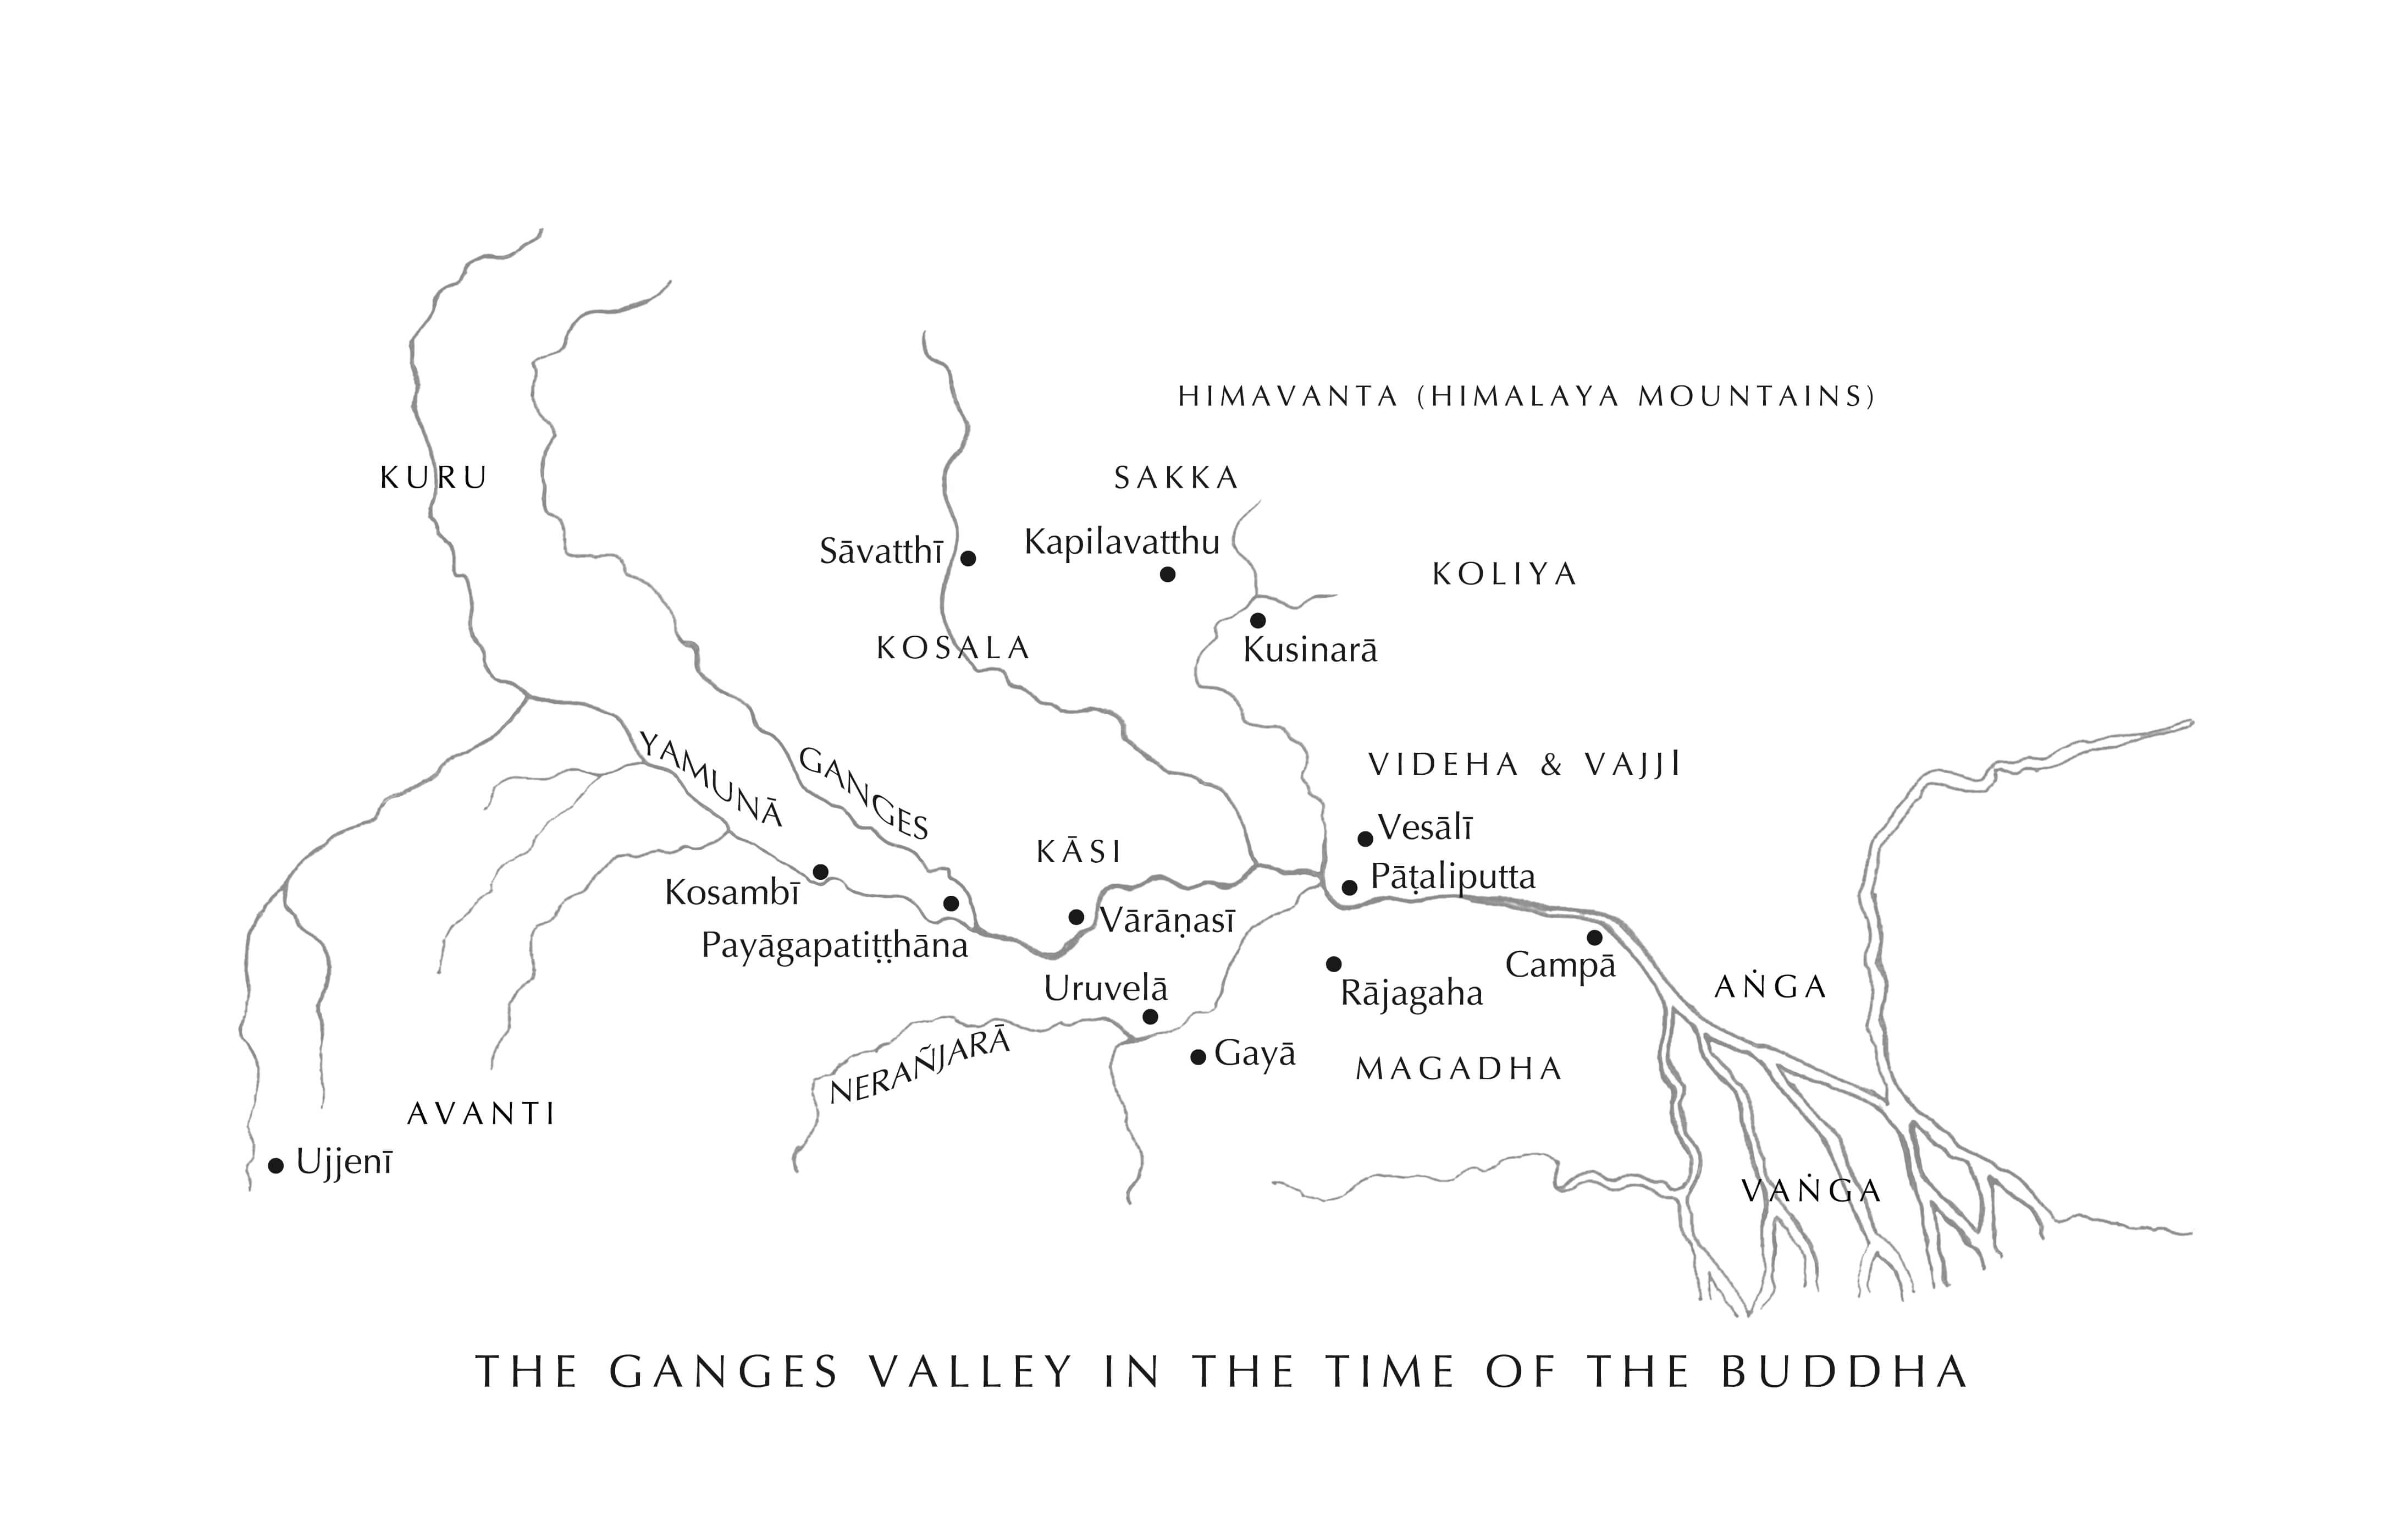 Map of the Ganges Valley in the Buddha's Time